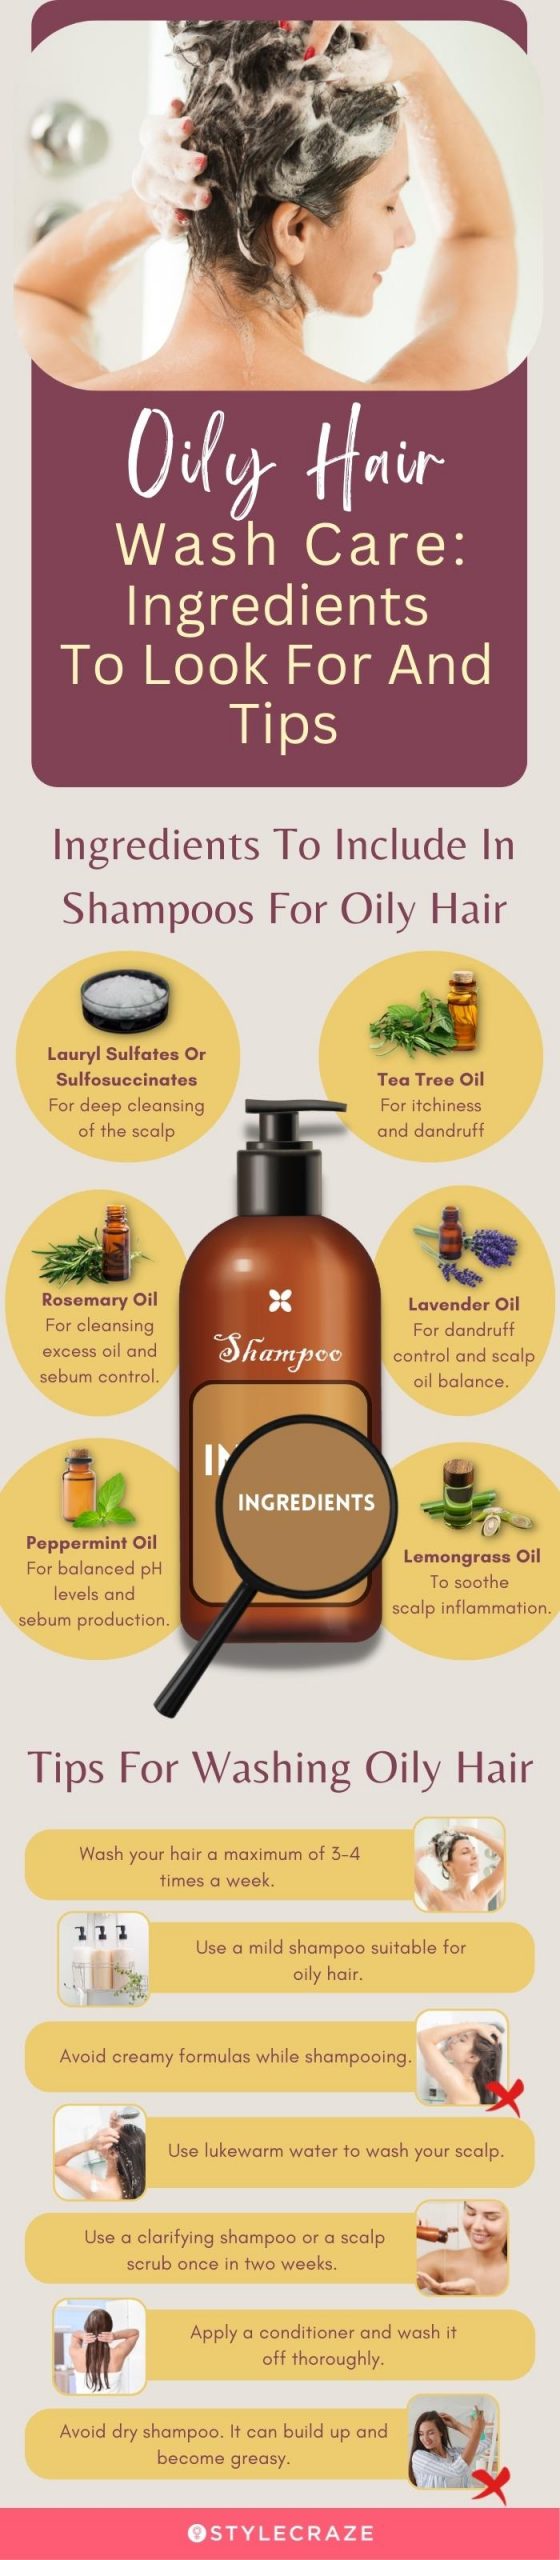 Oily Hair Wash Care: Ingredients To Look For And Tips [infographic]